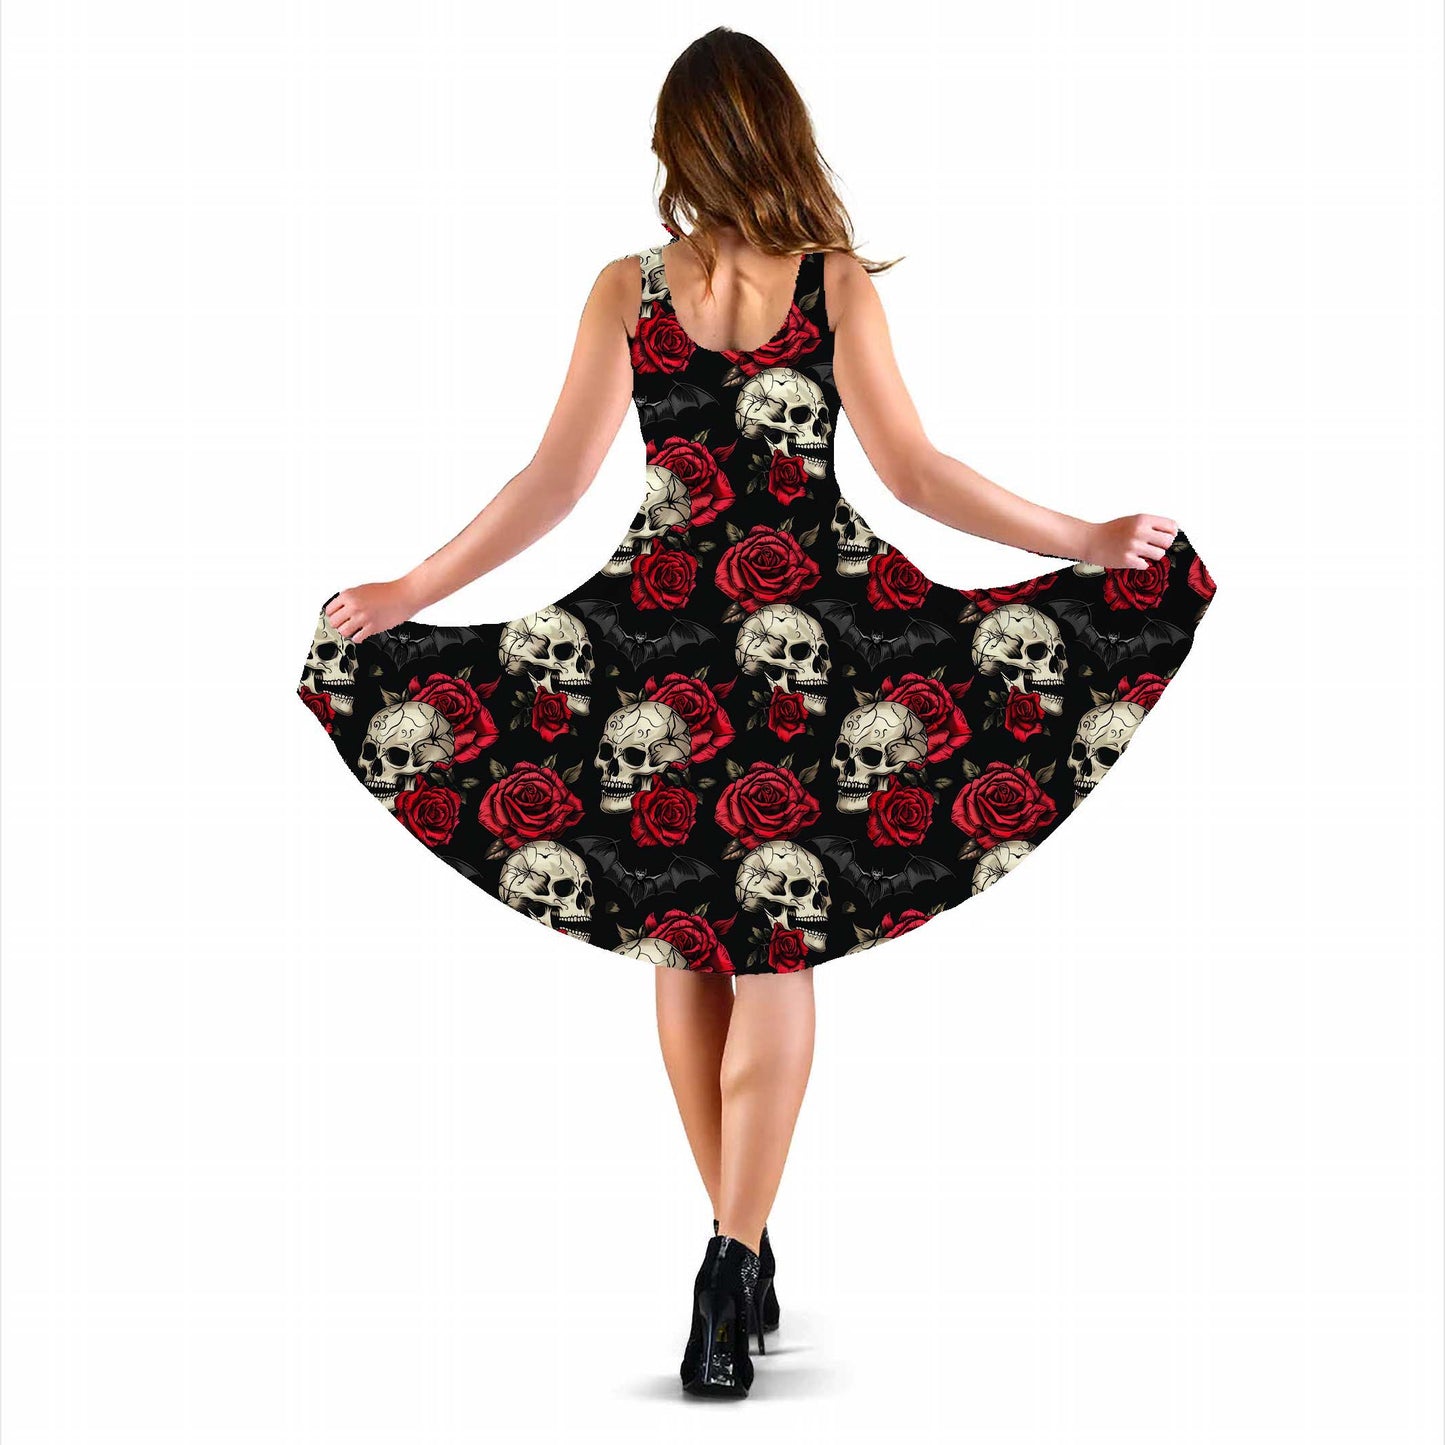 Skulls and Roses Gothic Sundress - Halloween Party Dress with Skulls and Bats (KATH1)